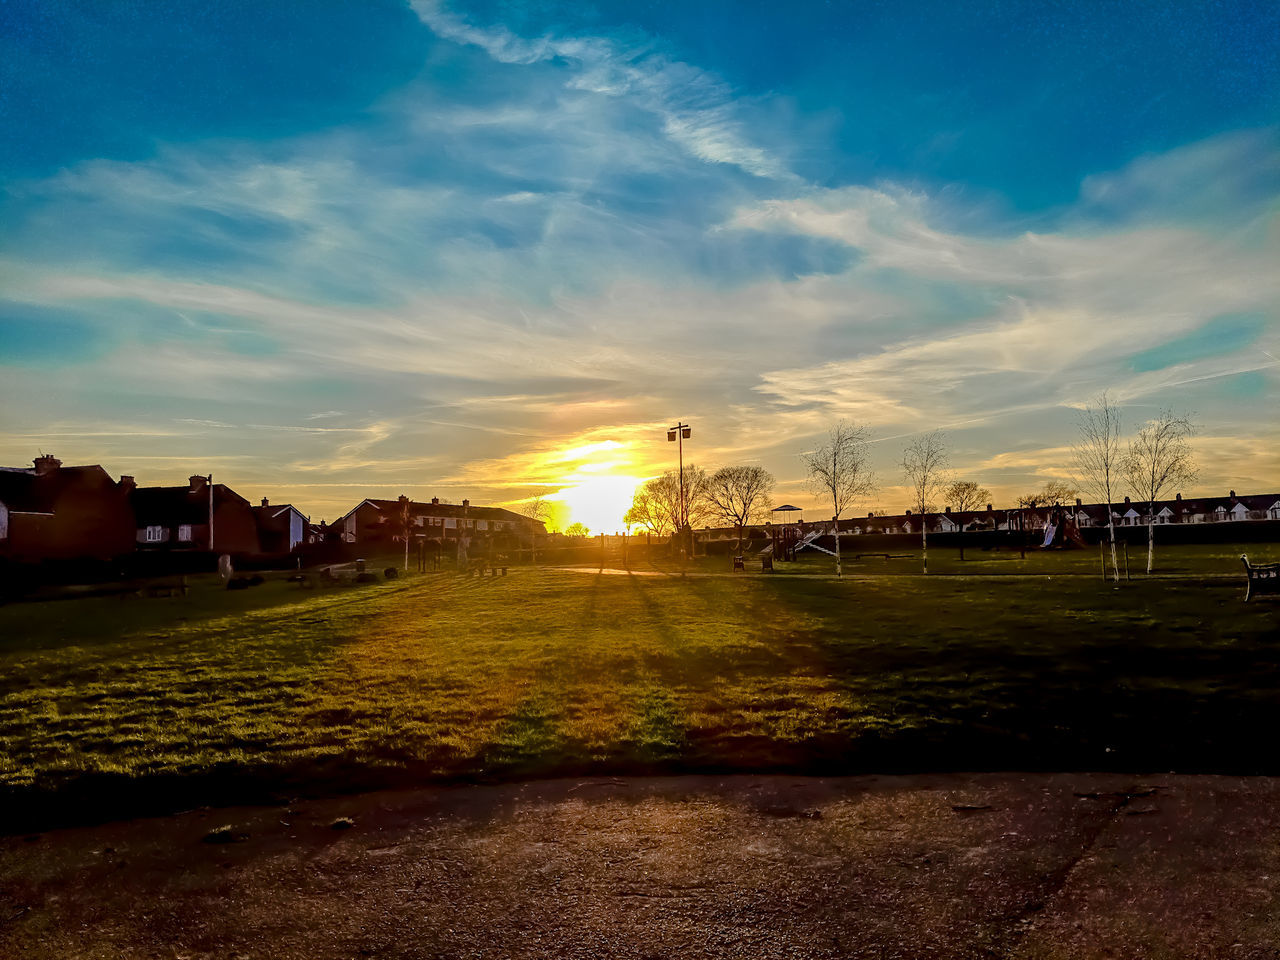 sky, sunset, cloud - sky, nature, sunlight, beauty in nature, field, land, grass, environment, sun, scenics - nature, tranquil scene, architecture, landscape, no people, tranquility, plant, building exterior, built structure, lens flare, outdoors